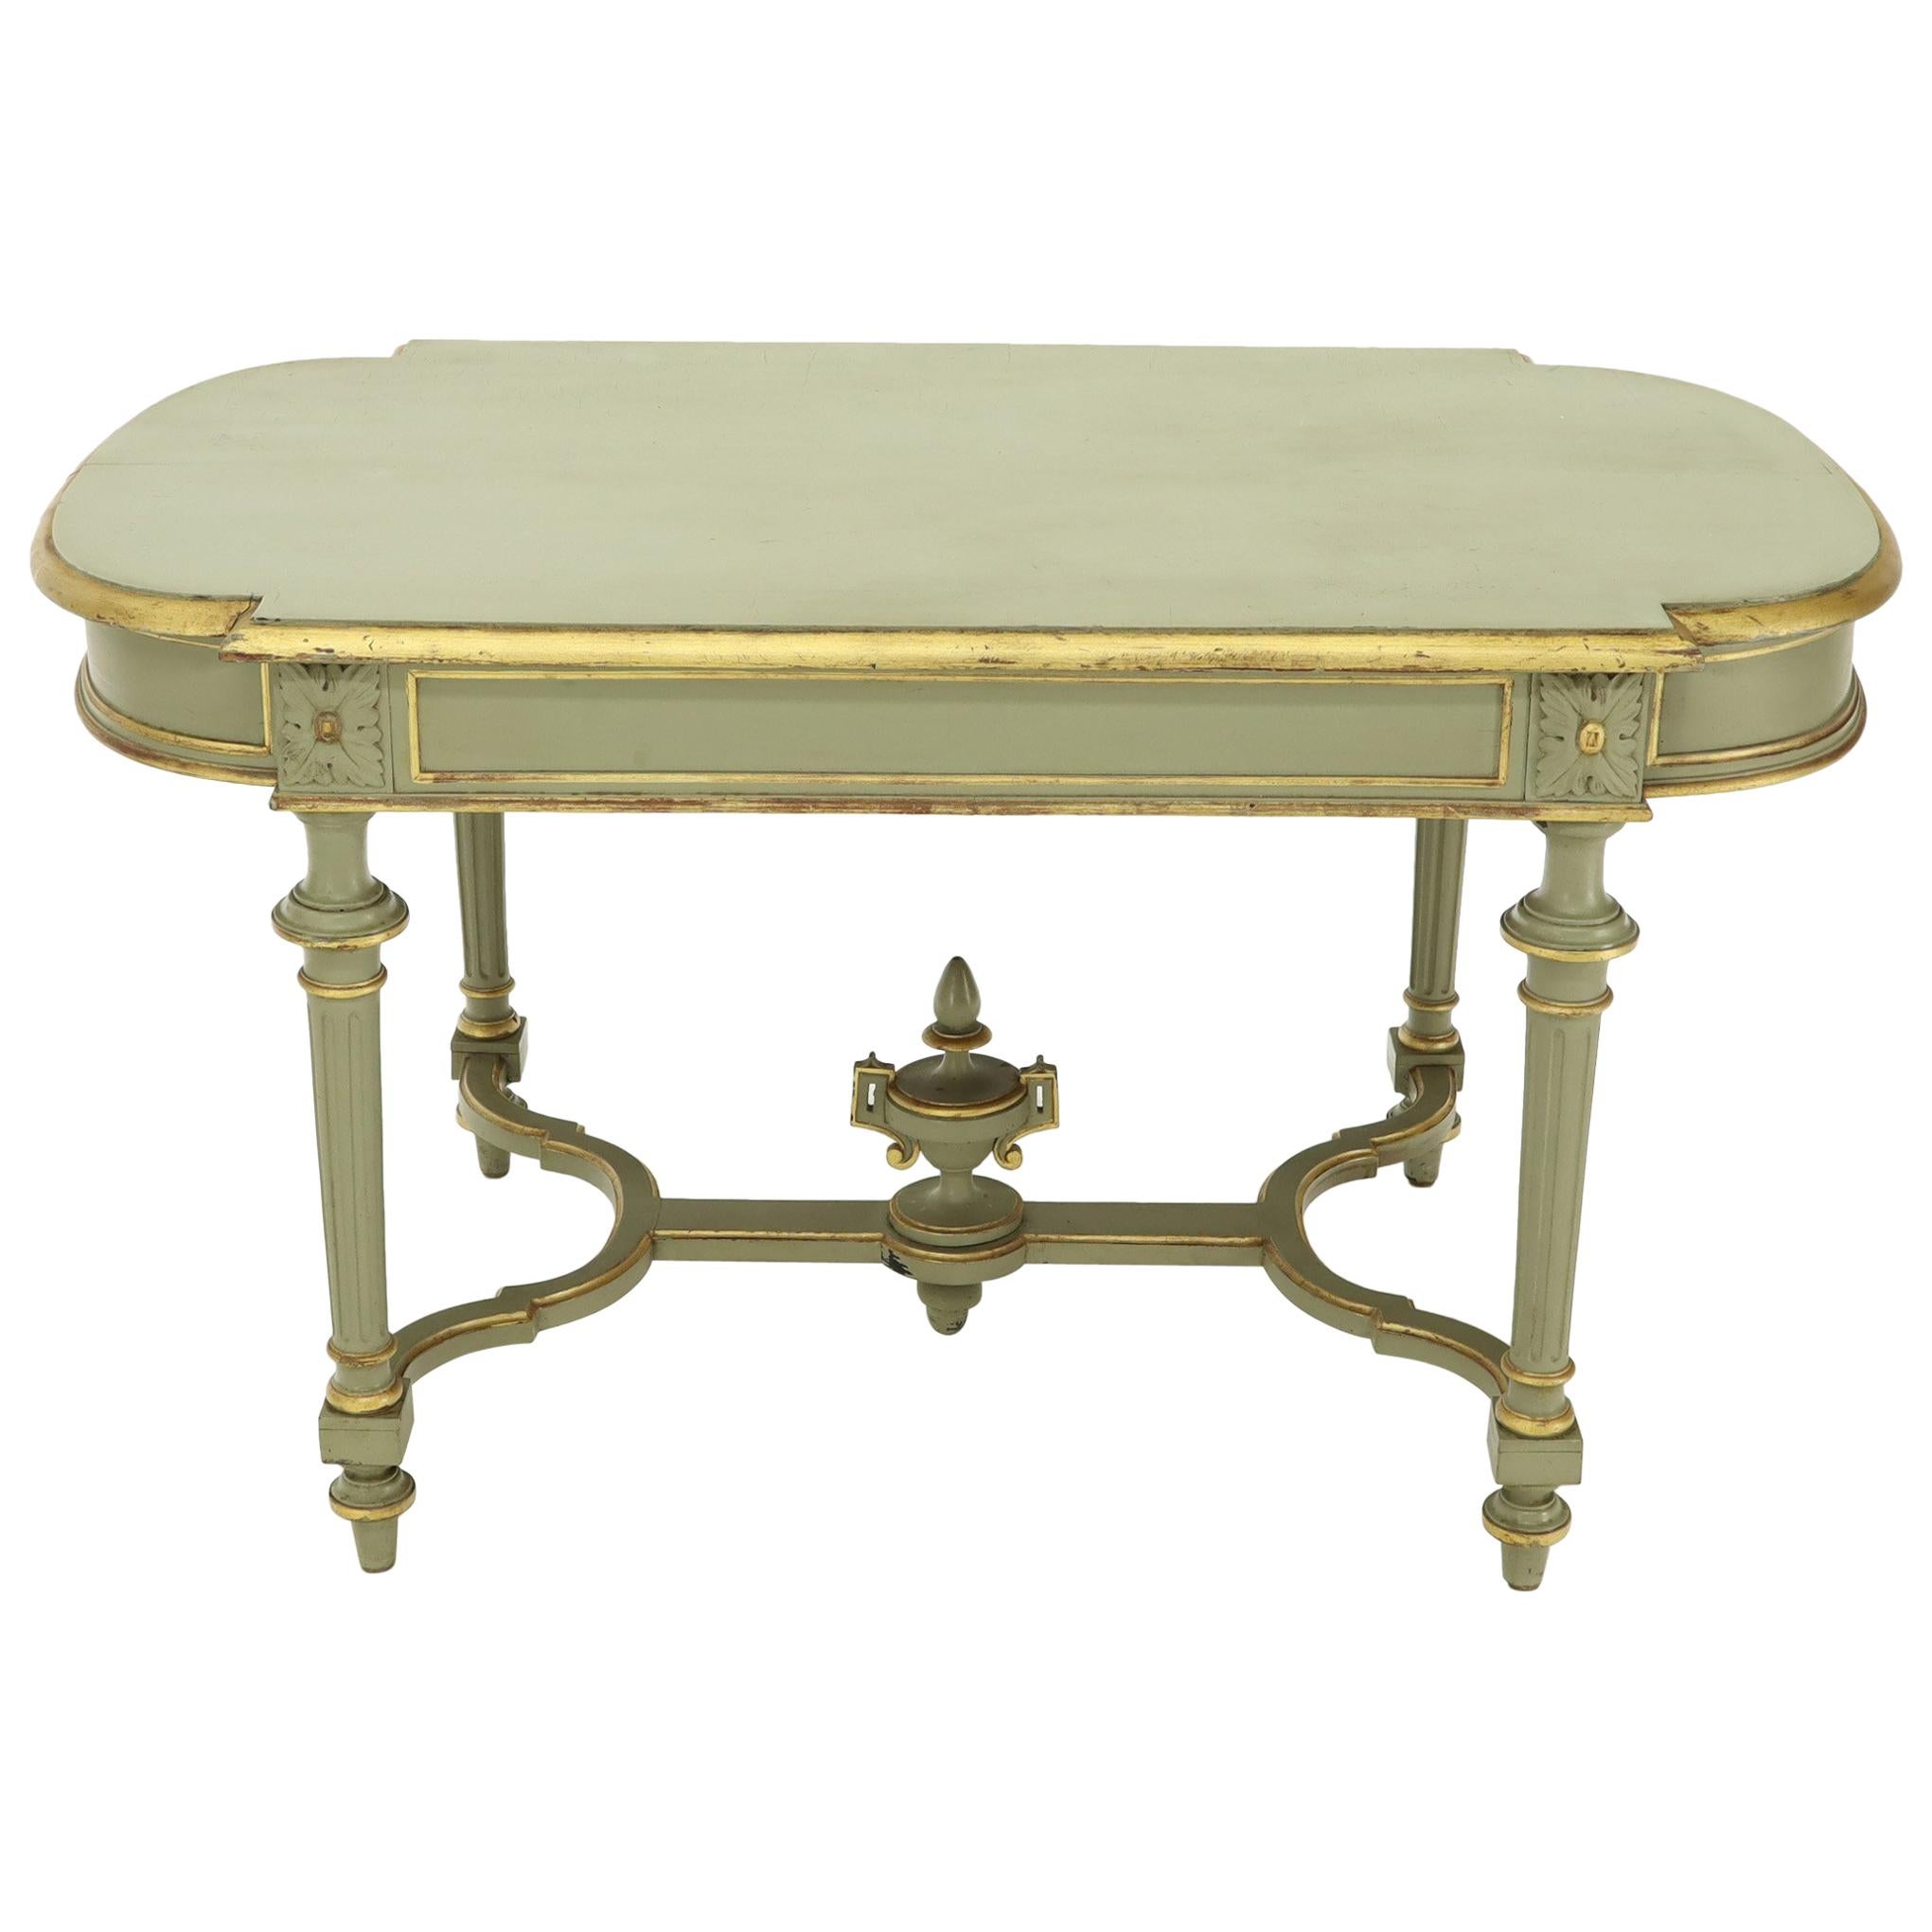 Shabby Chic and Gold Leaf Distressed Antique Writing Table Desk Large Console